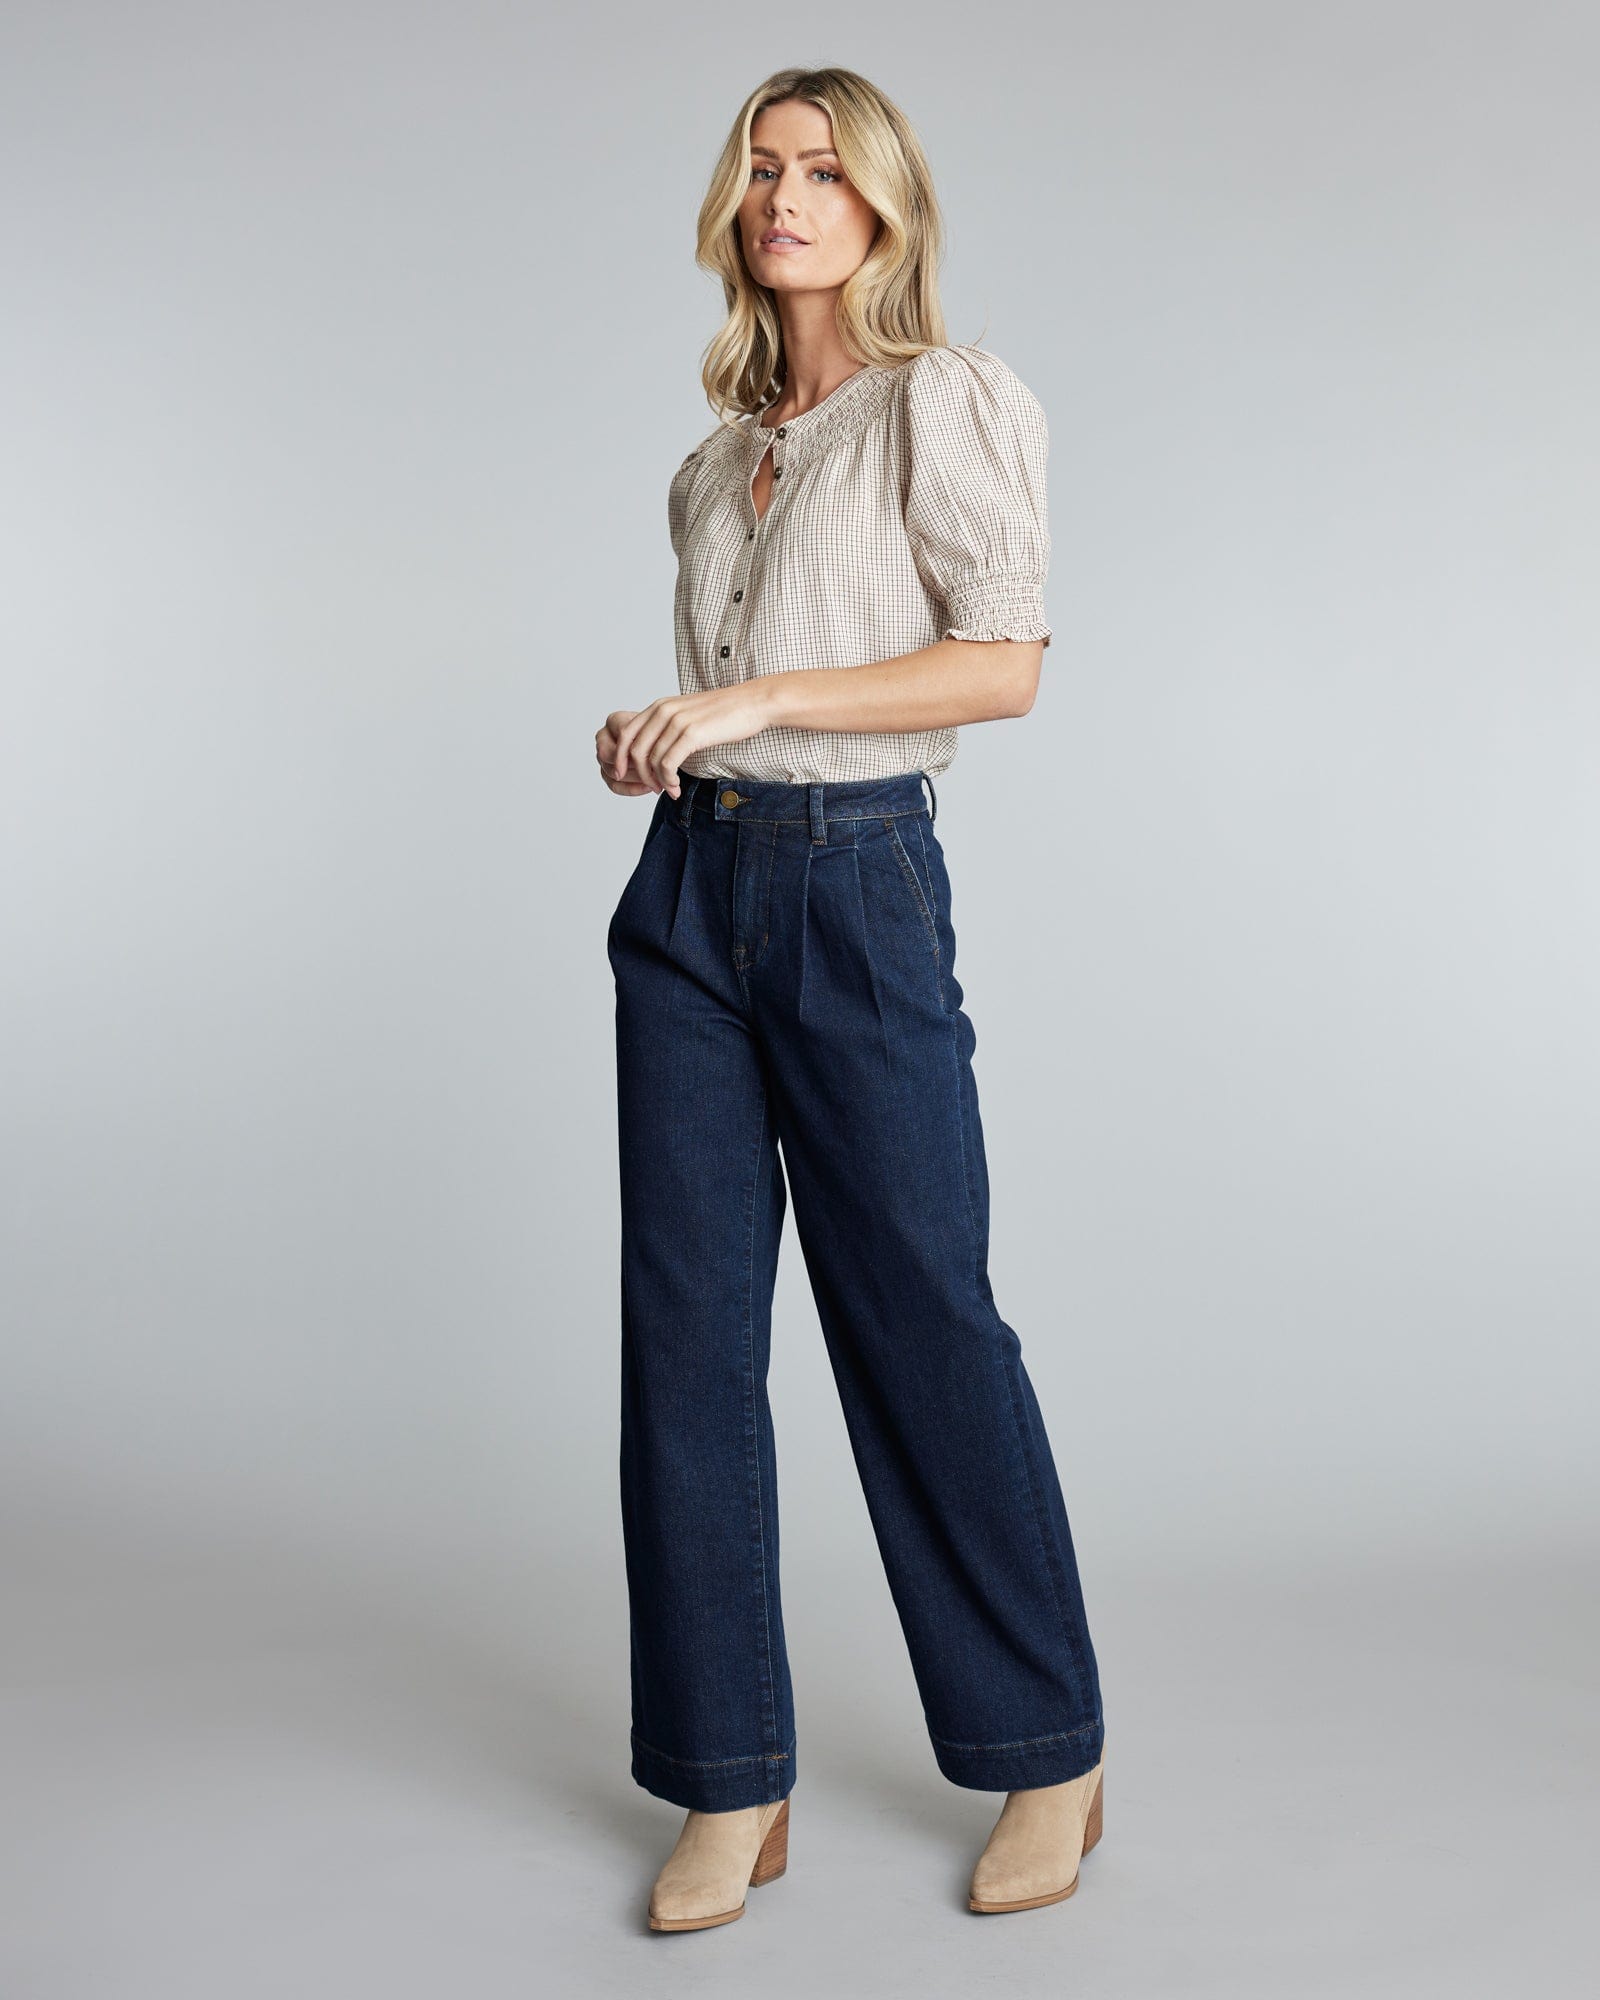 Woman in pleated trouser jeans.